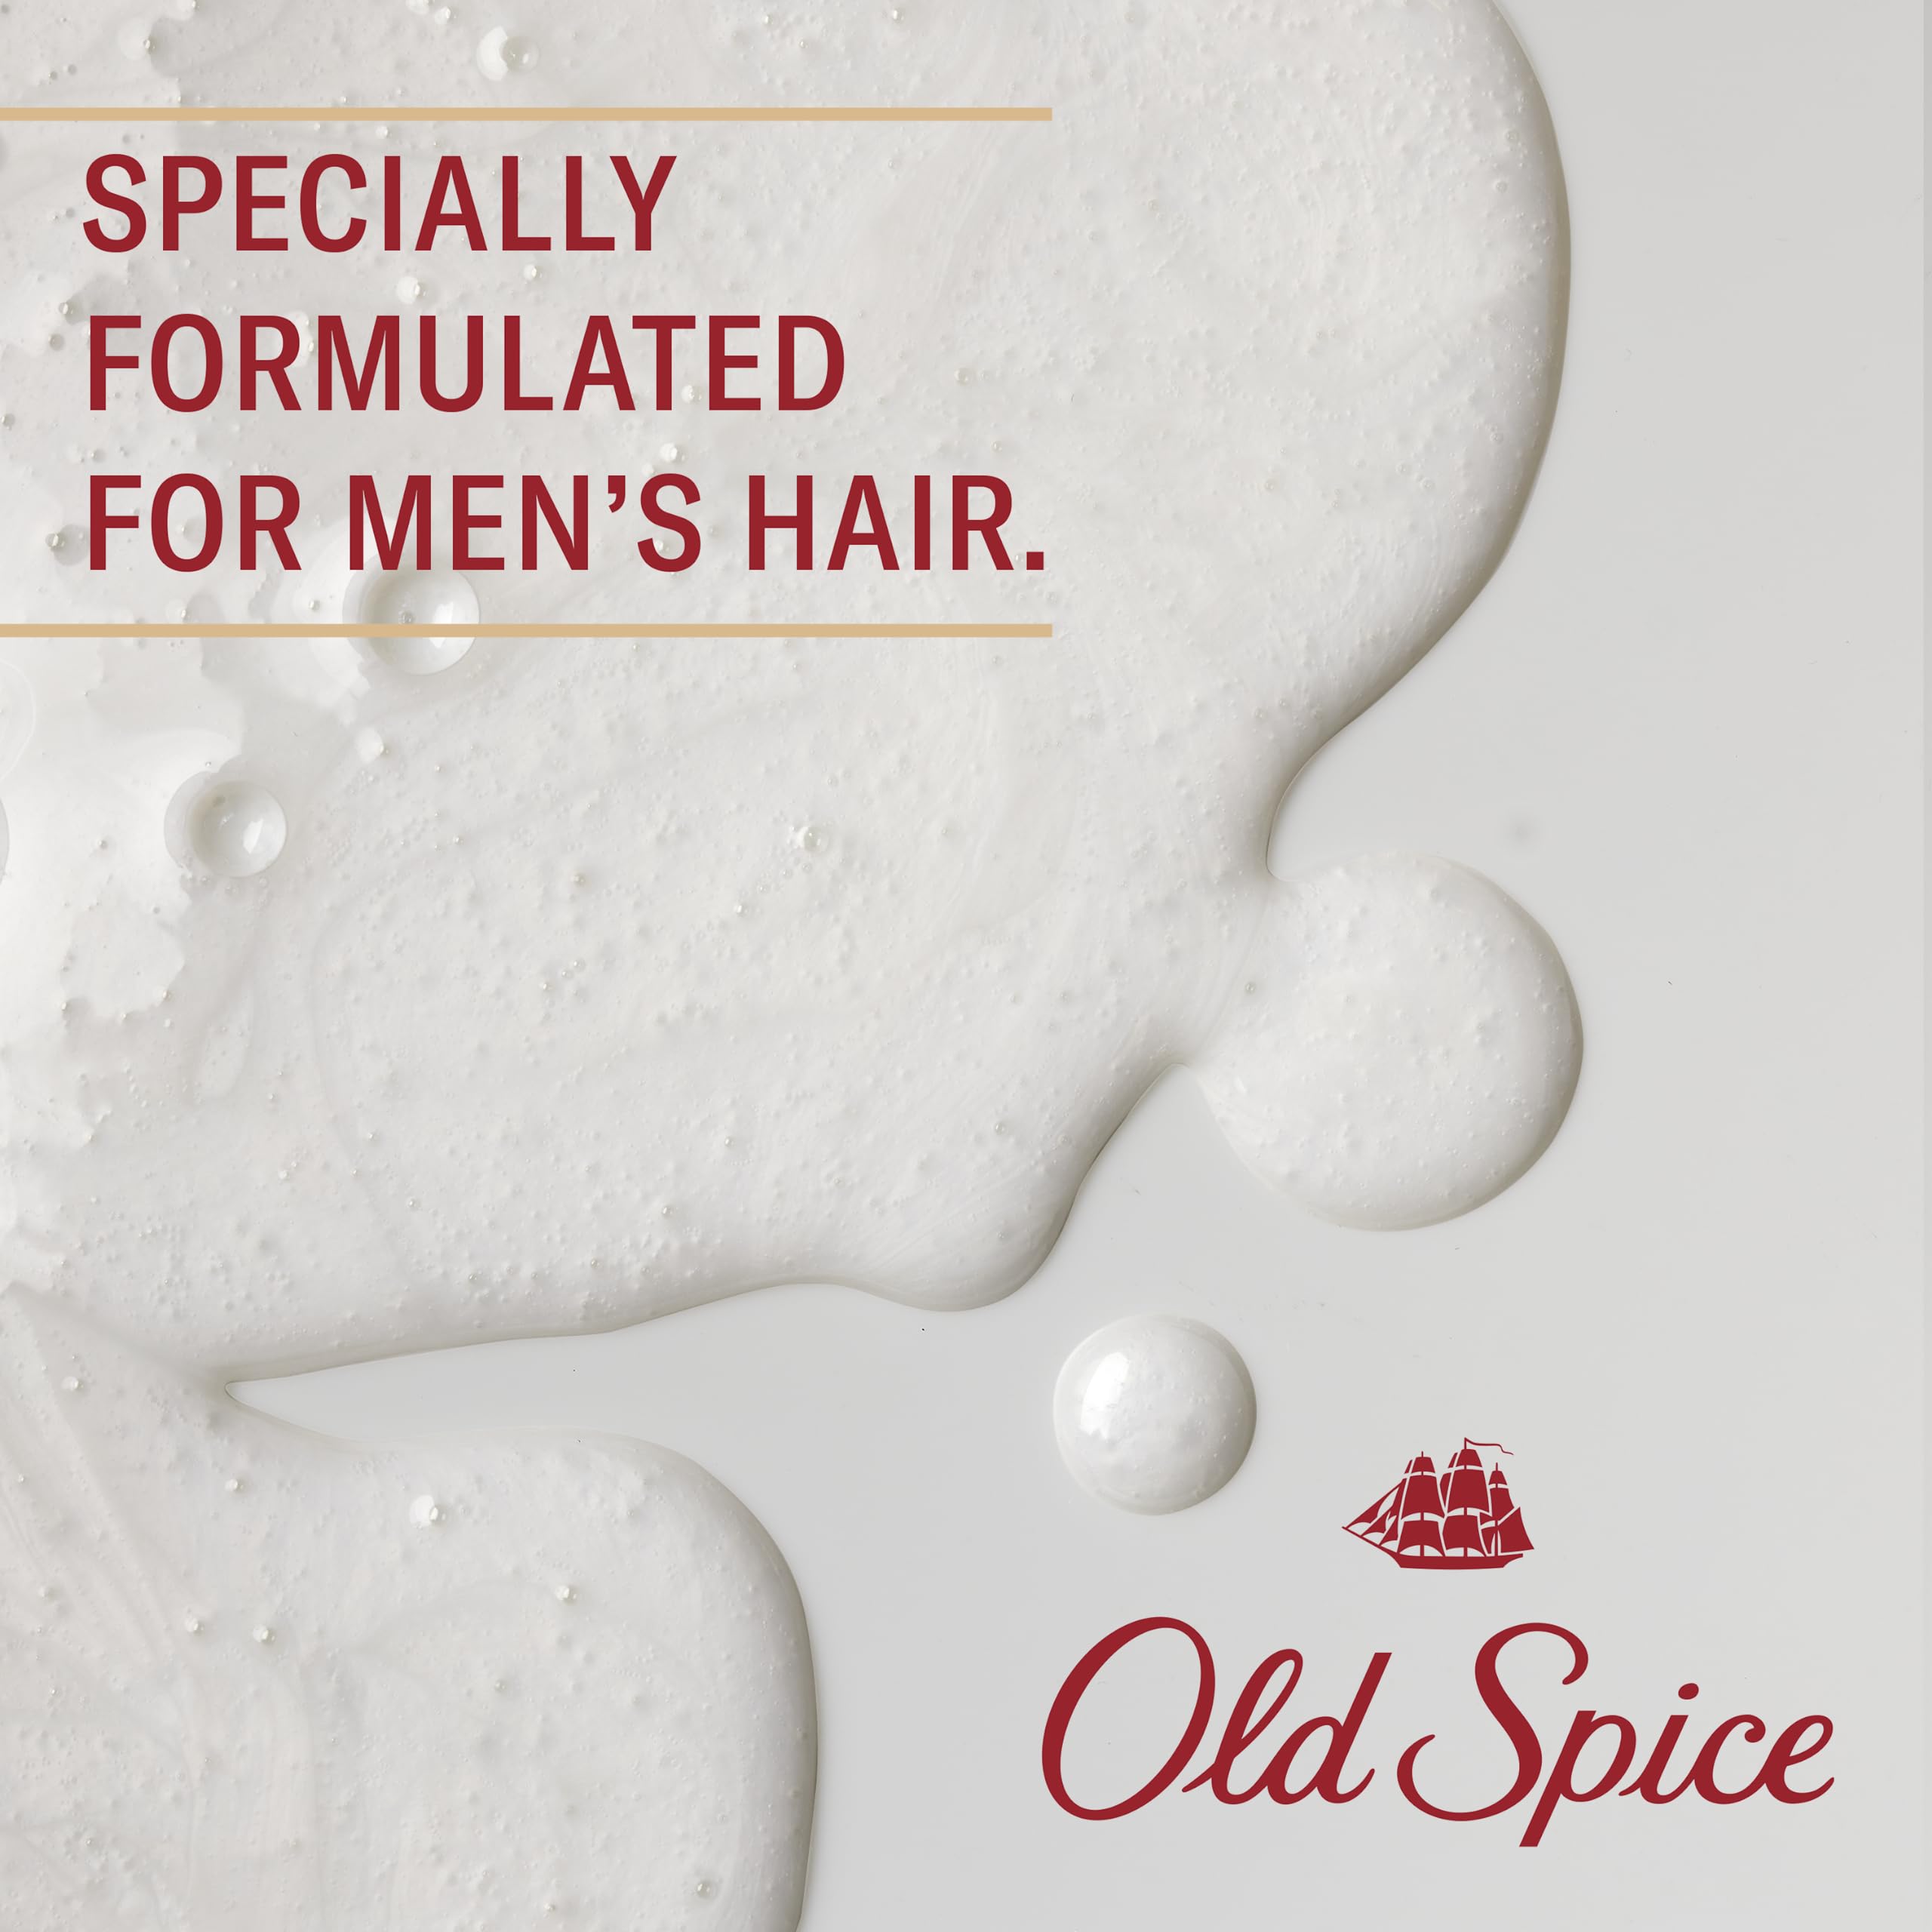 Old Spice Fiji 2-in-1 Shampoo and Conditioner for Men, 21.9 Fl Oz Each, Twin Pack